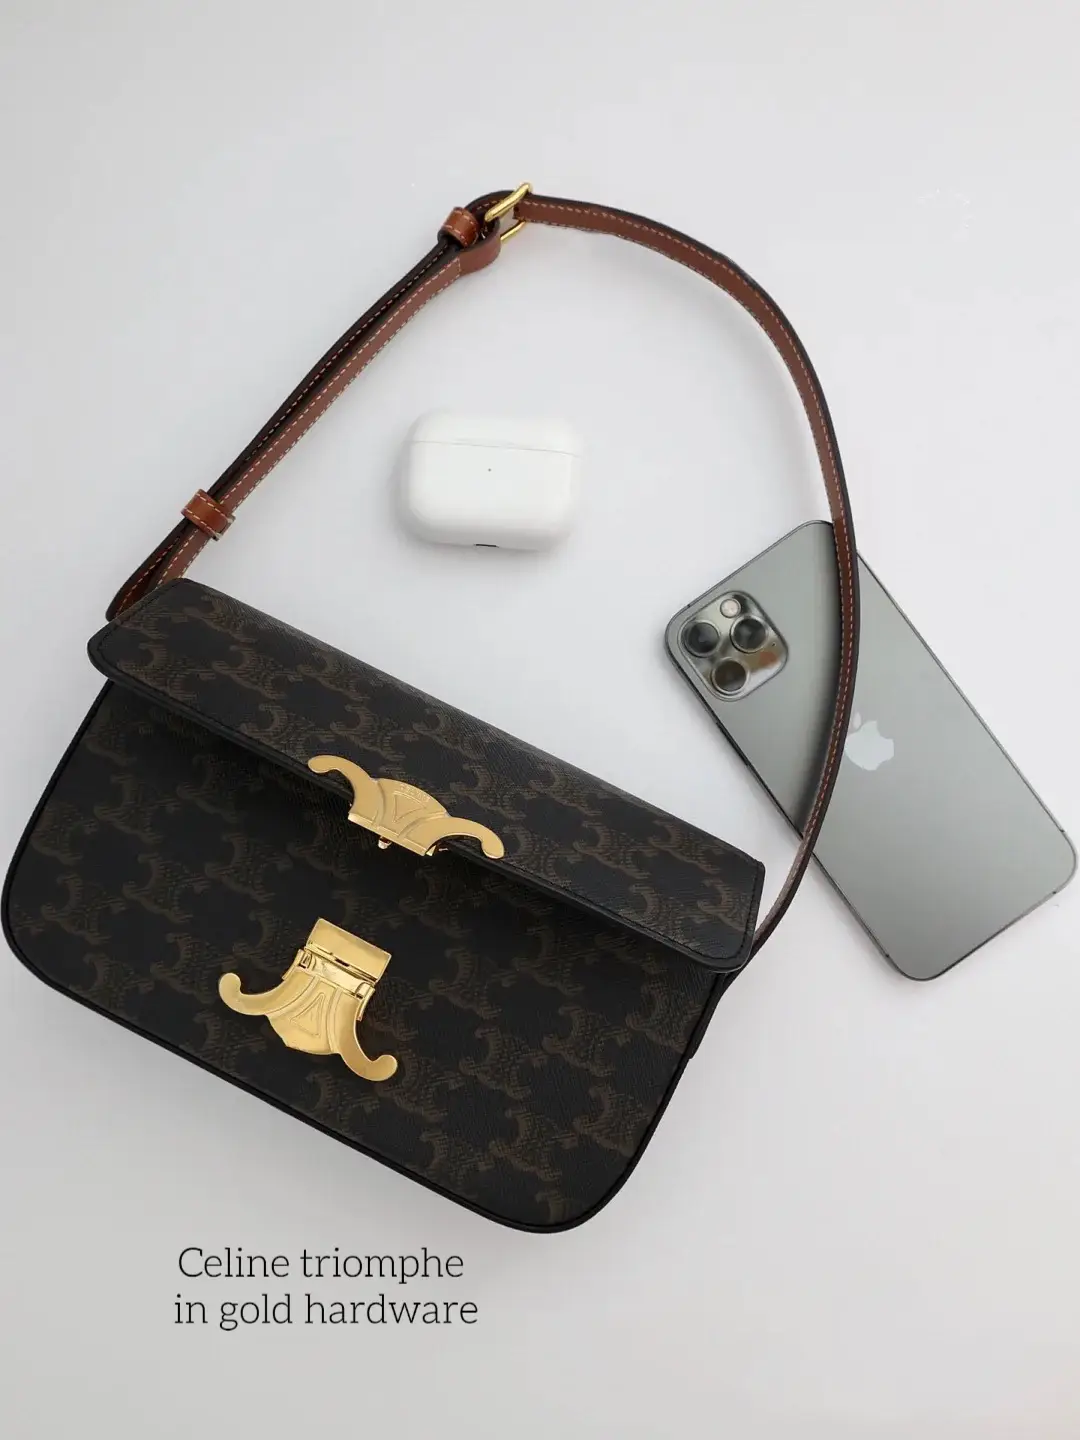 TRYING ON THE NEW CELINE AVA TRIOMPHE HANDBAG, Gallery posted by  michelleorgeta